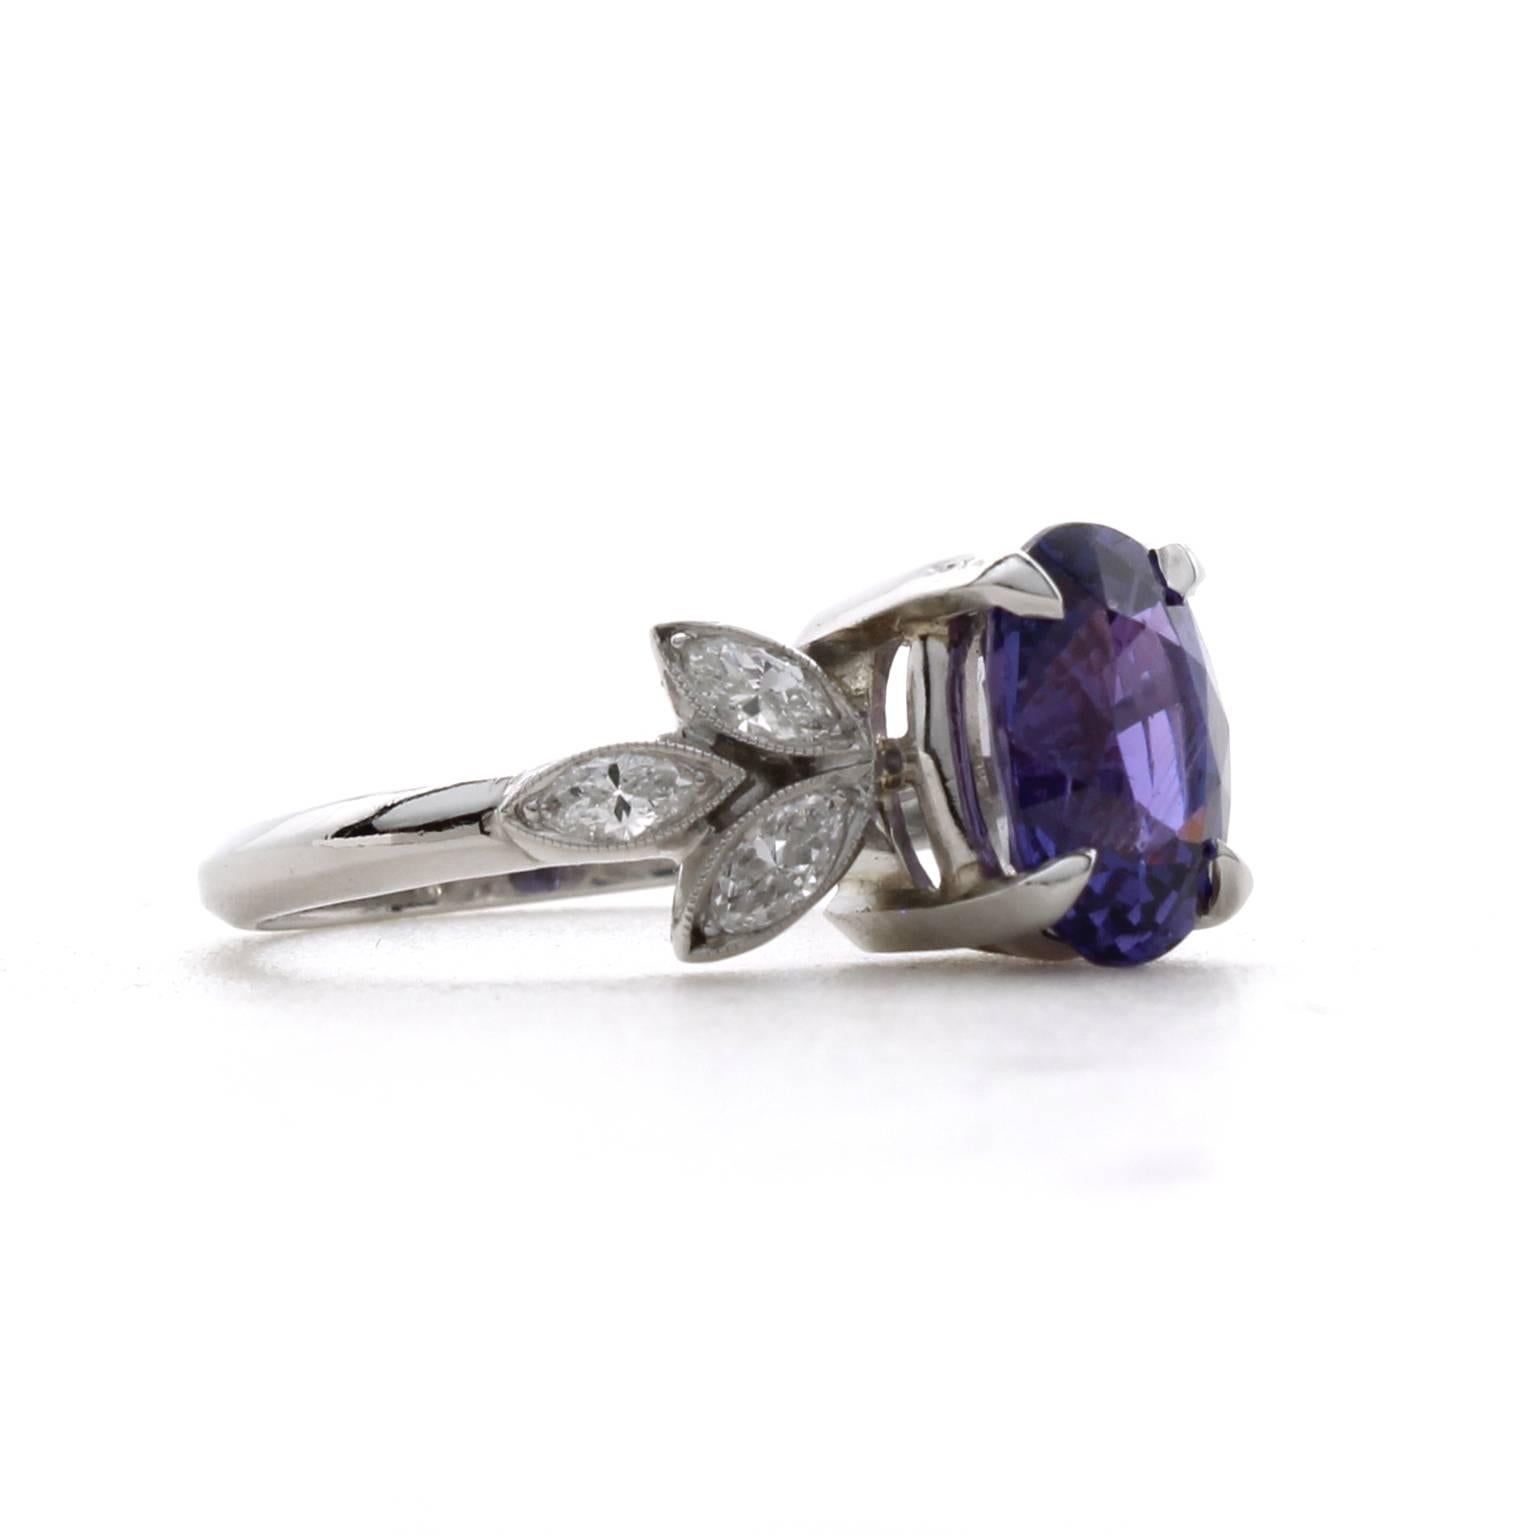 This one-of-a-kind platinum ring features a natural 2.18 carat purple sapphire with no indications of heat treatment. It is accented by six marquise diamonds with a total carat weight of 0.46 and color grade of F-G and clarity of VS1-VS2. 

The ring